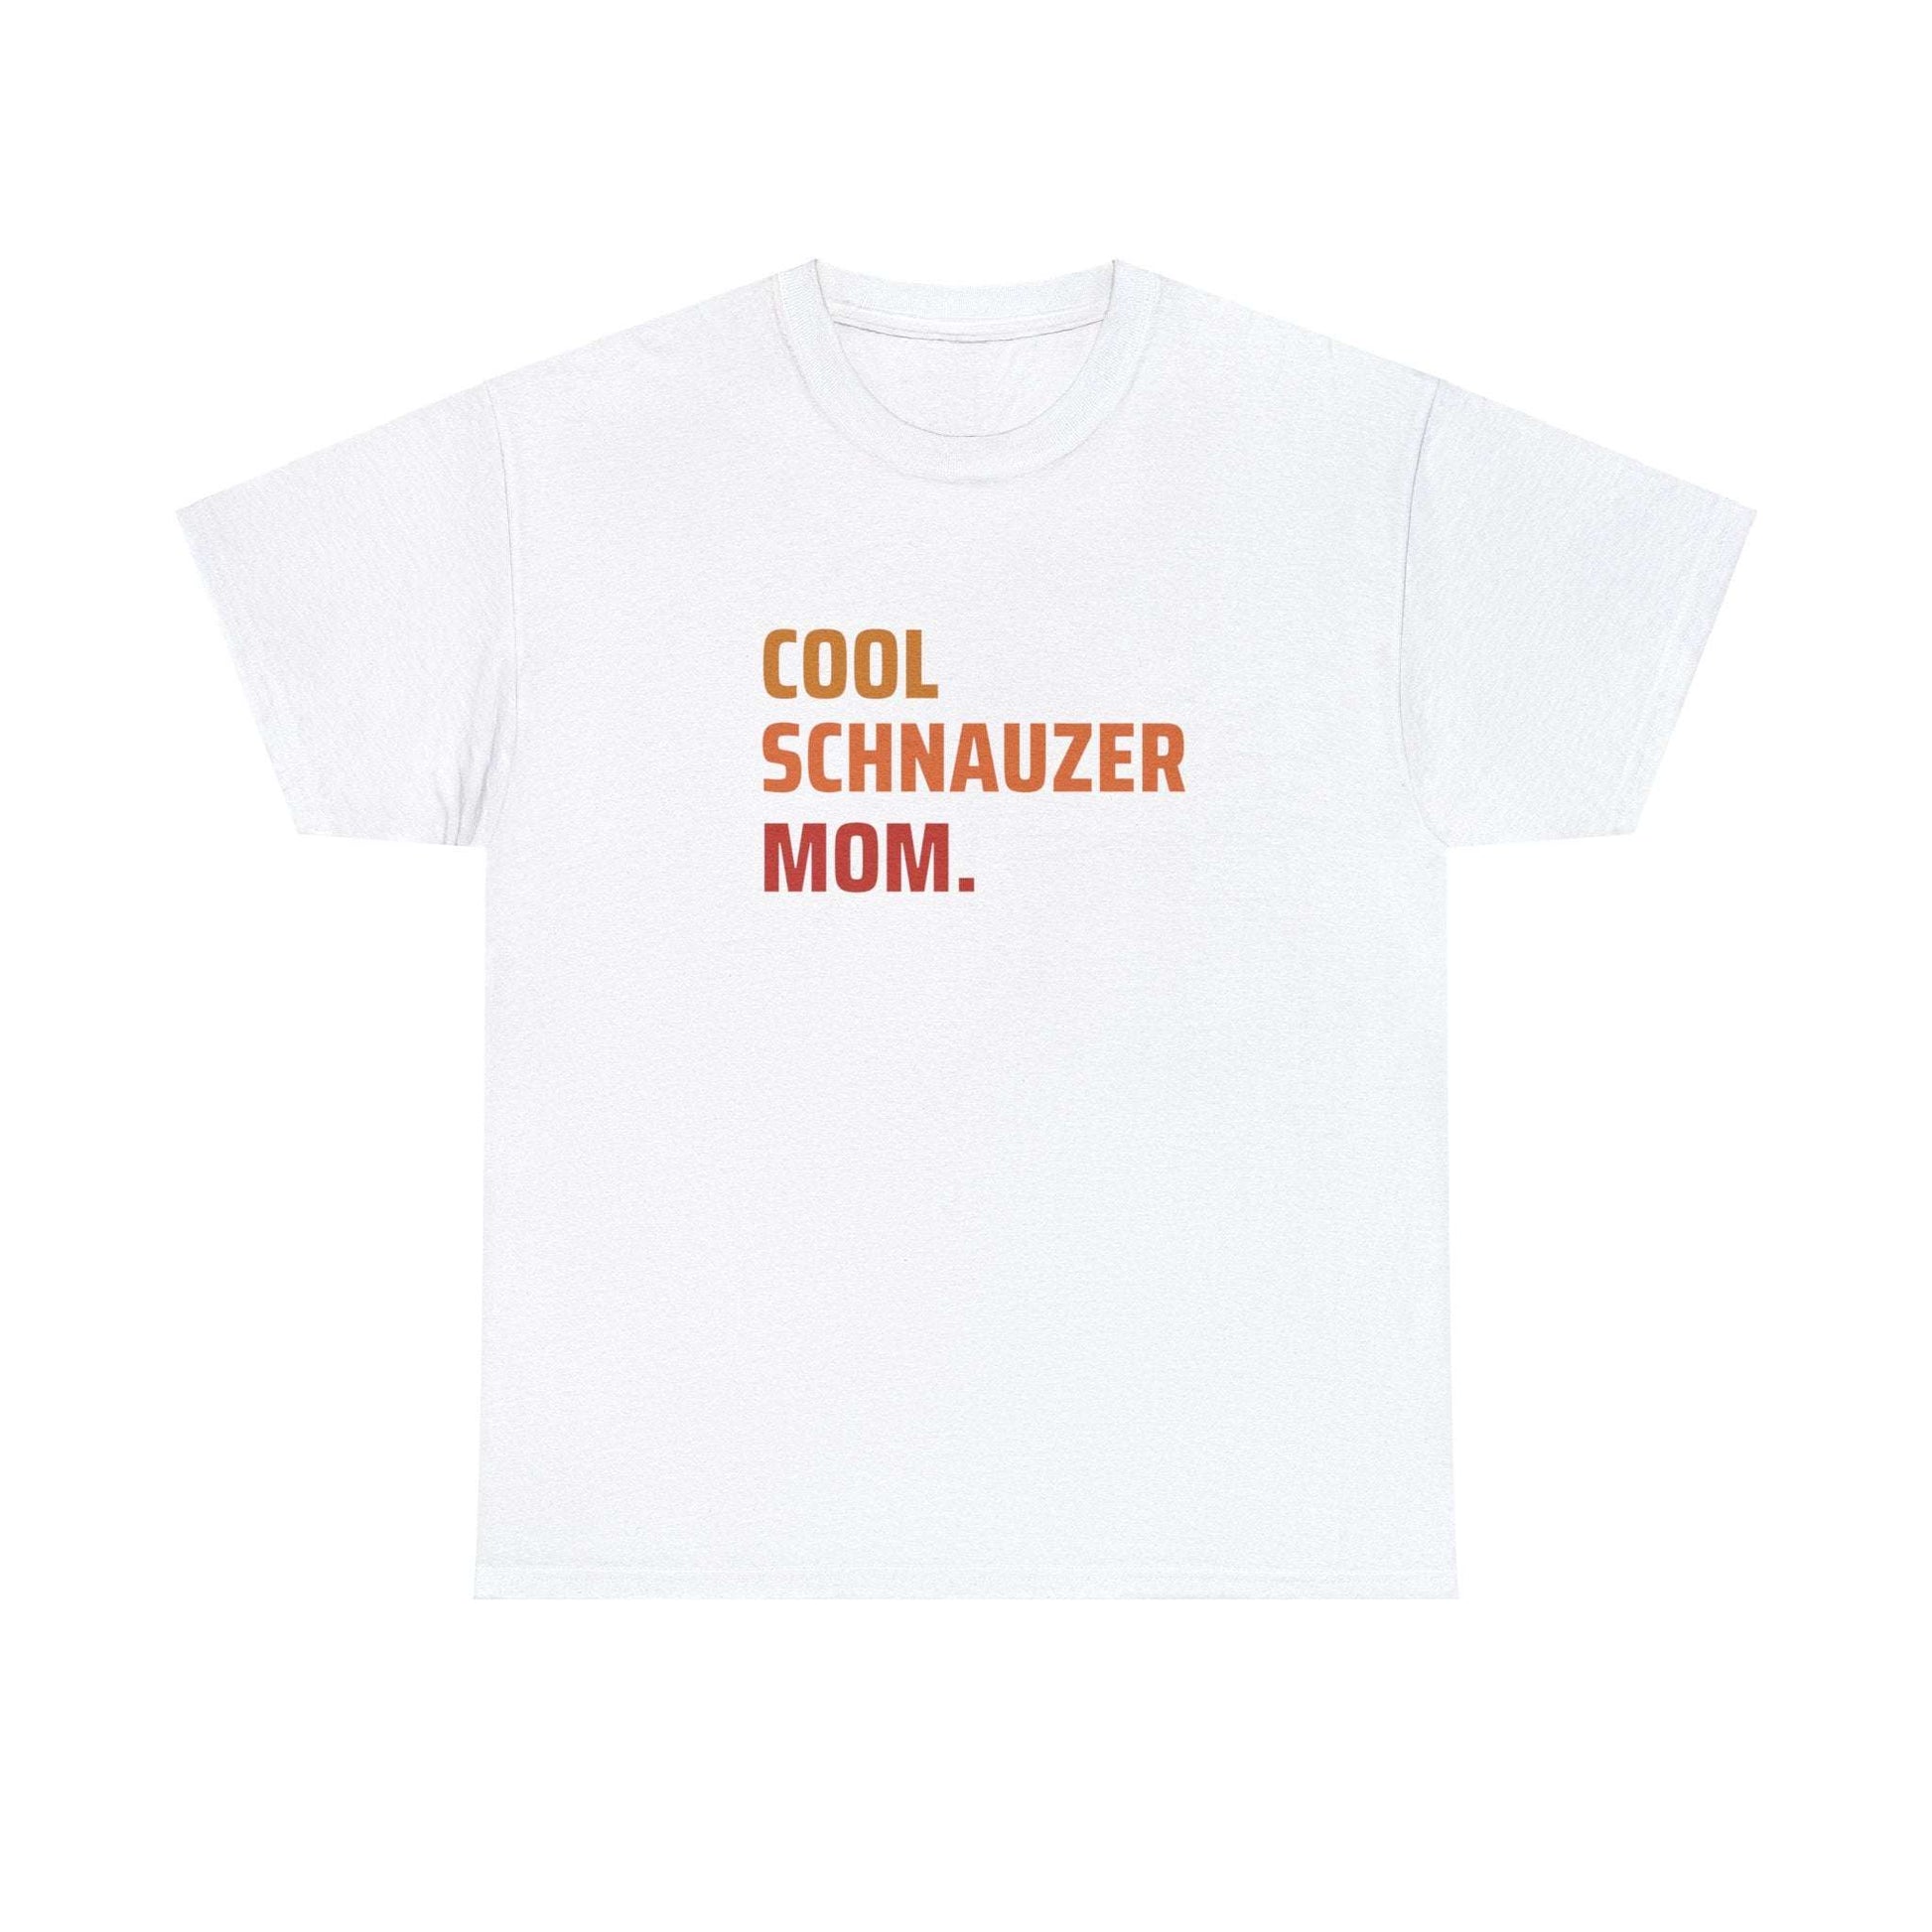 Fabulous Tee Shirts' 'Cool Schnauzer Mom' white t-shirt displayed to emphasize its unique design and premium quality.